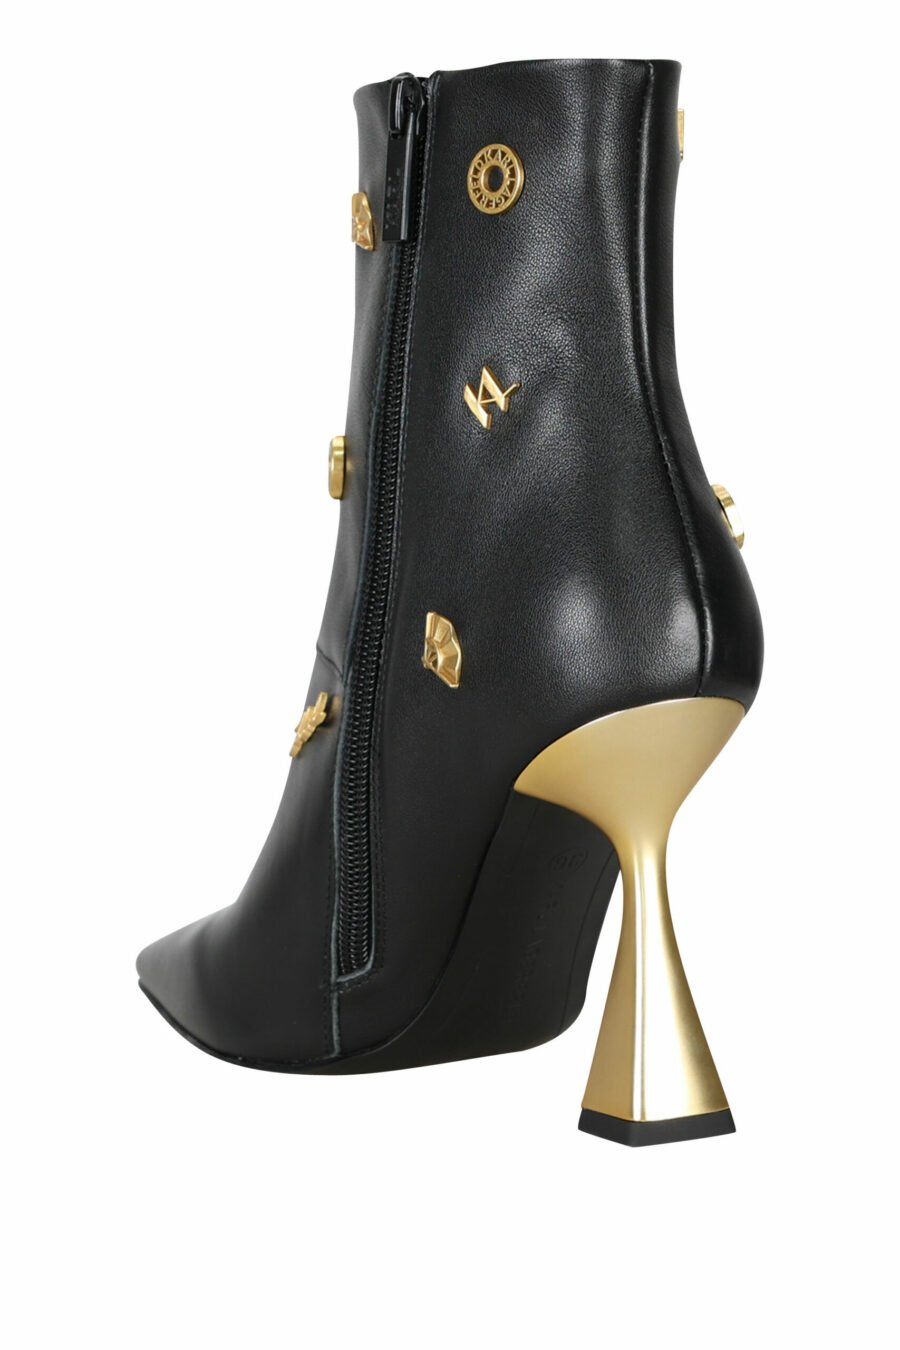 Black ankle boots with gold heel and pins - 505952982034 3 scaled